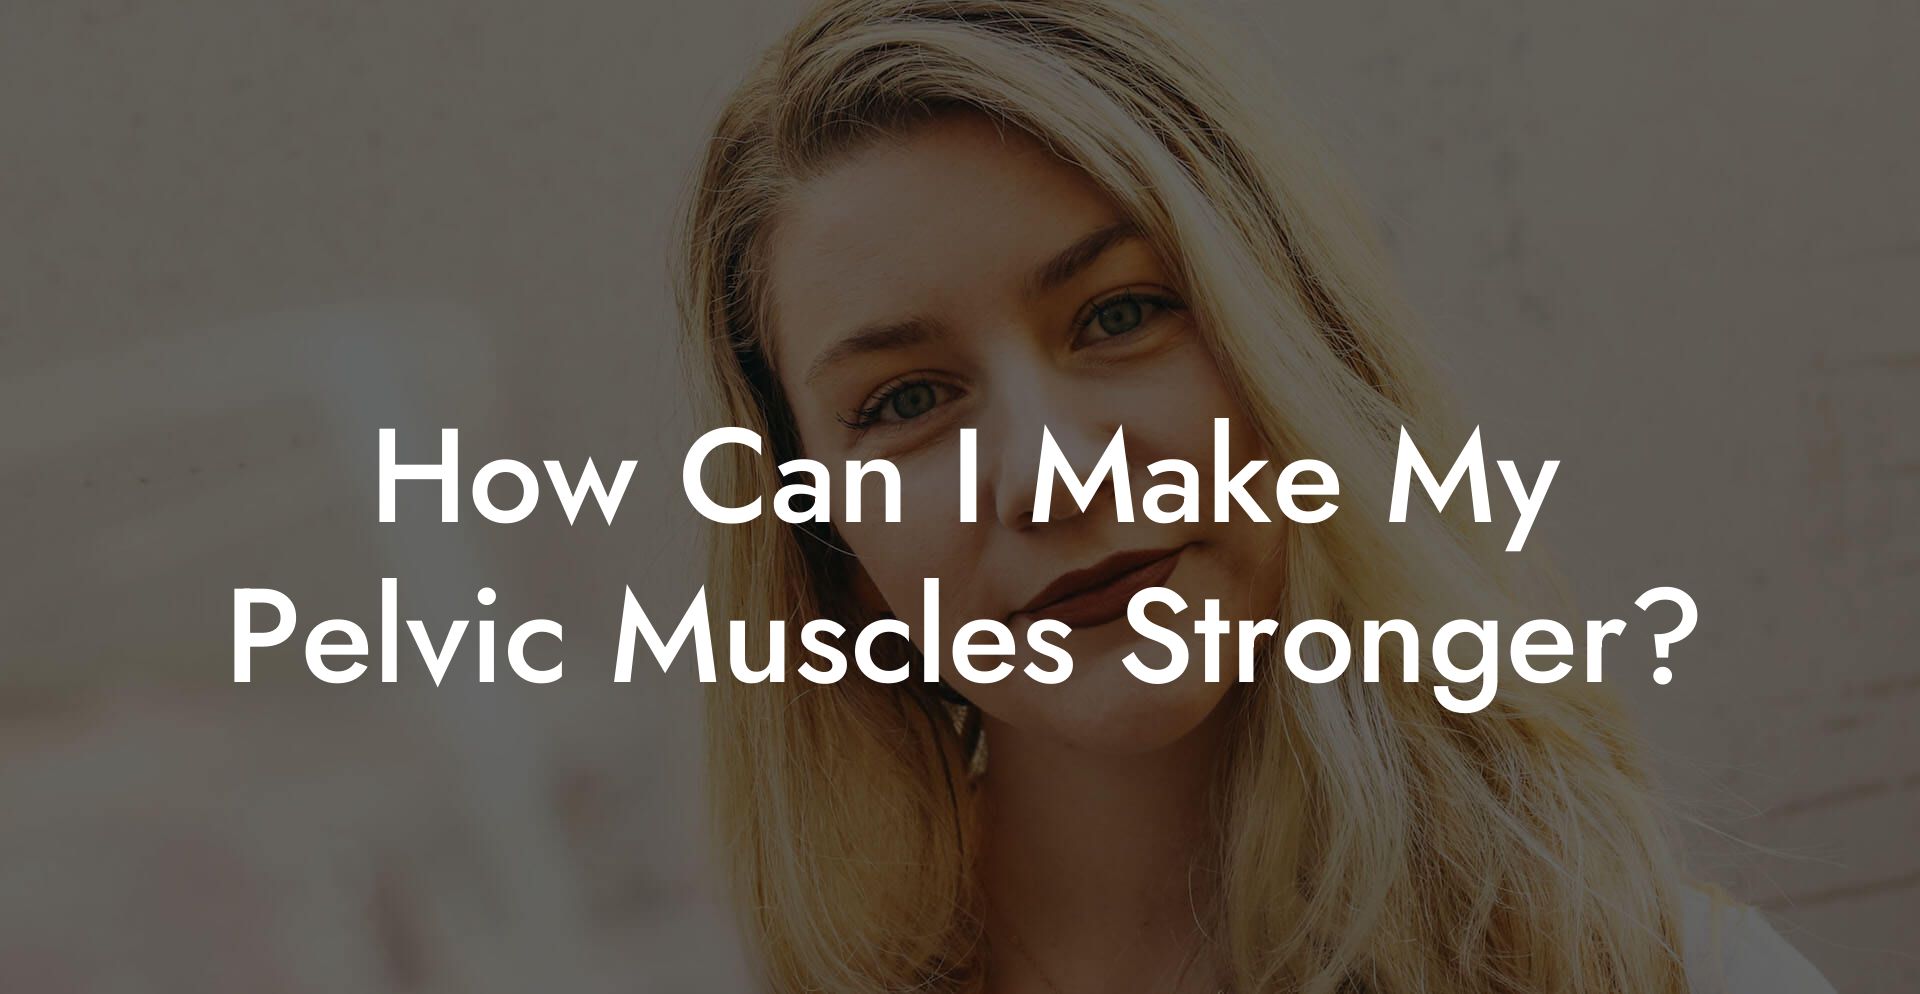 How Can I Make My Pelvic Muscles Stronger?